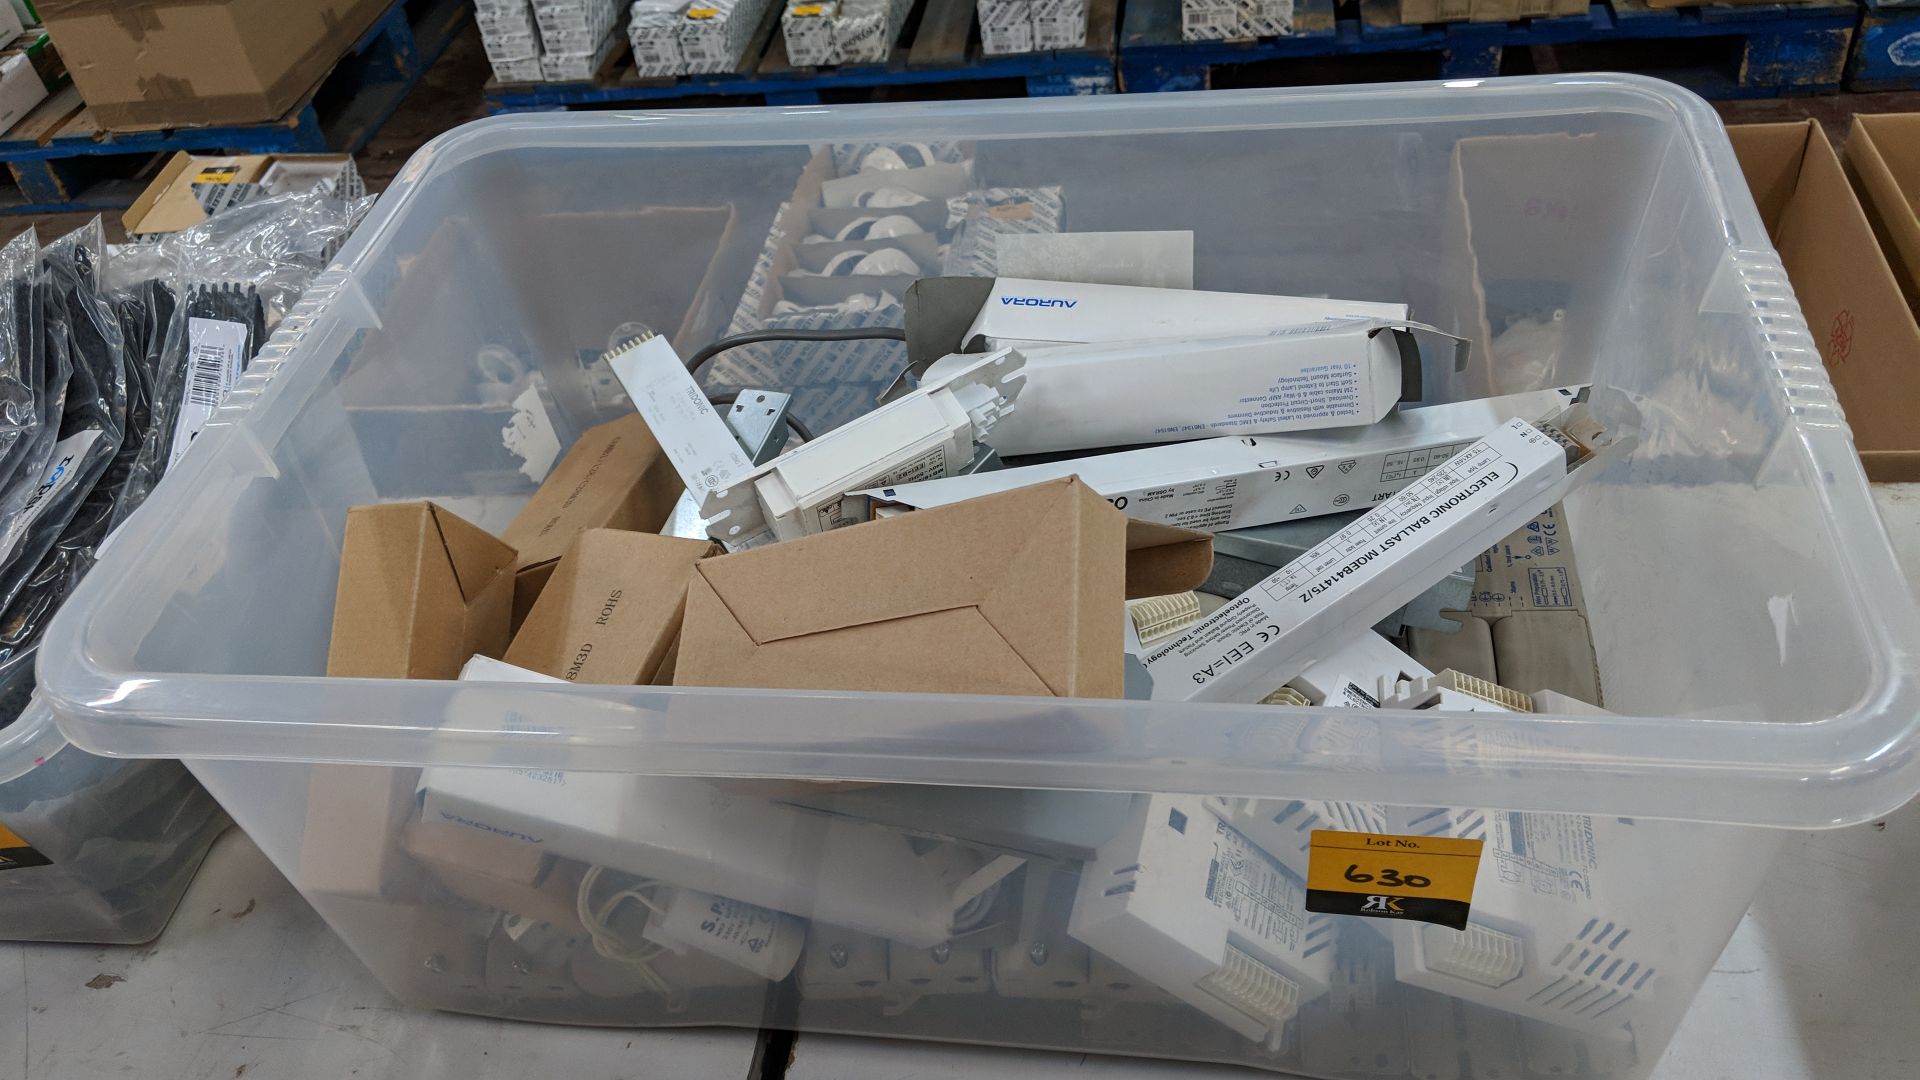 Contents of a crate of assorted lighting transformers, power packs and similar - crate excluded